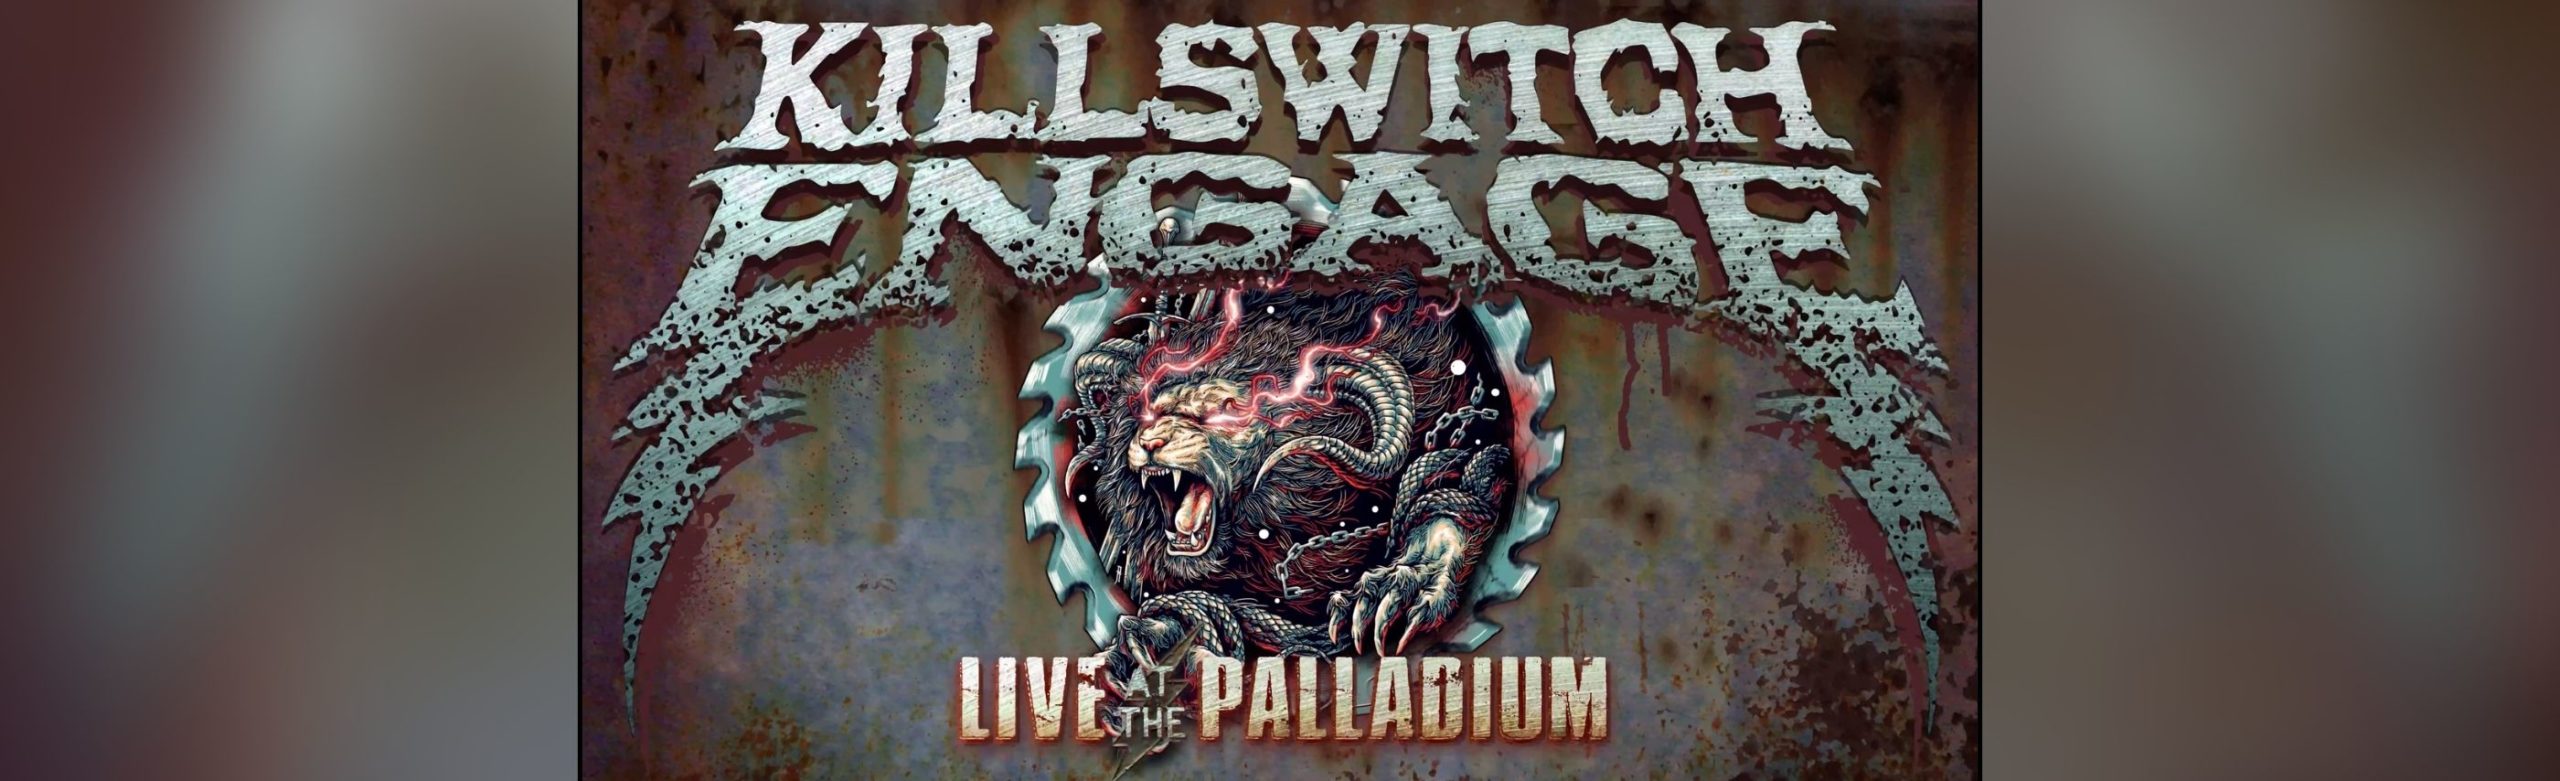 Killswitch Engage Offer Fans Rebroadcast of “Live At The Palladium” Image